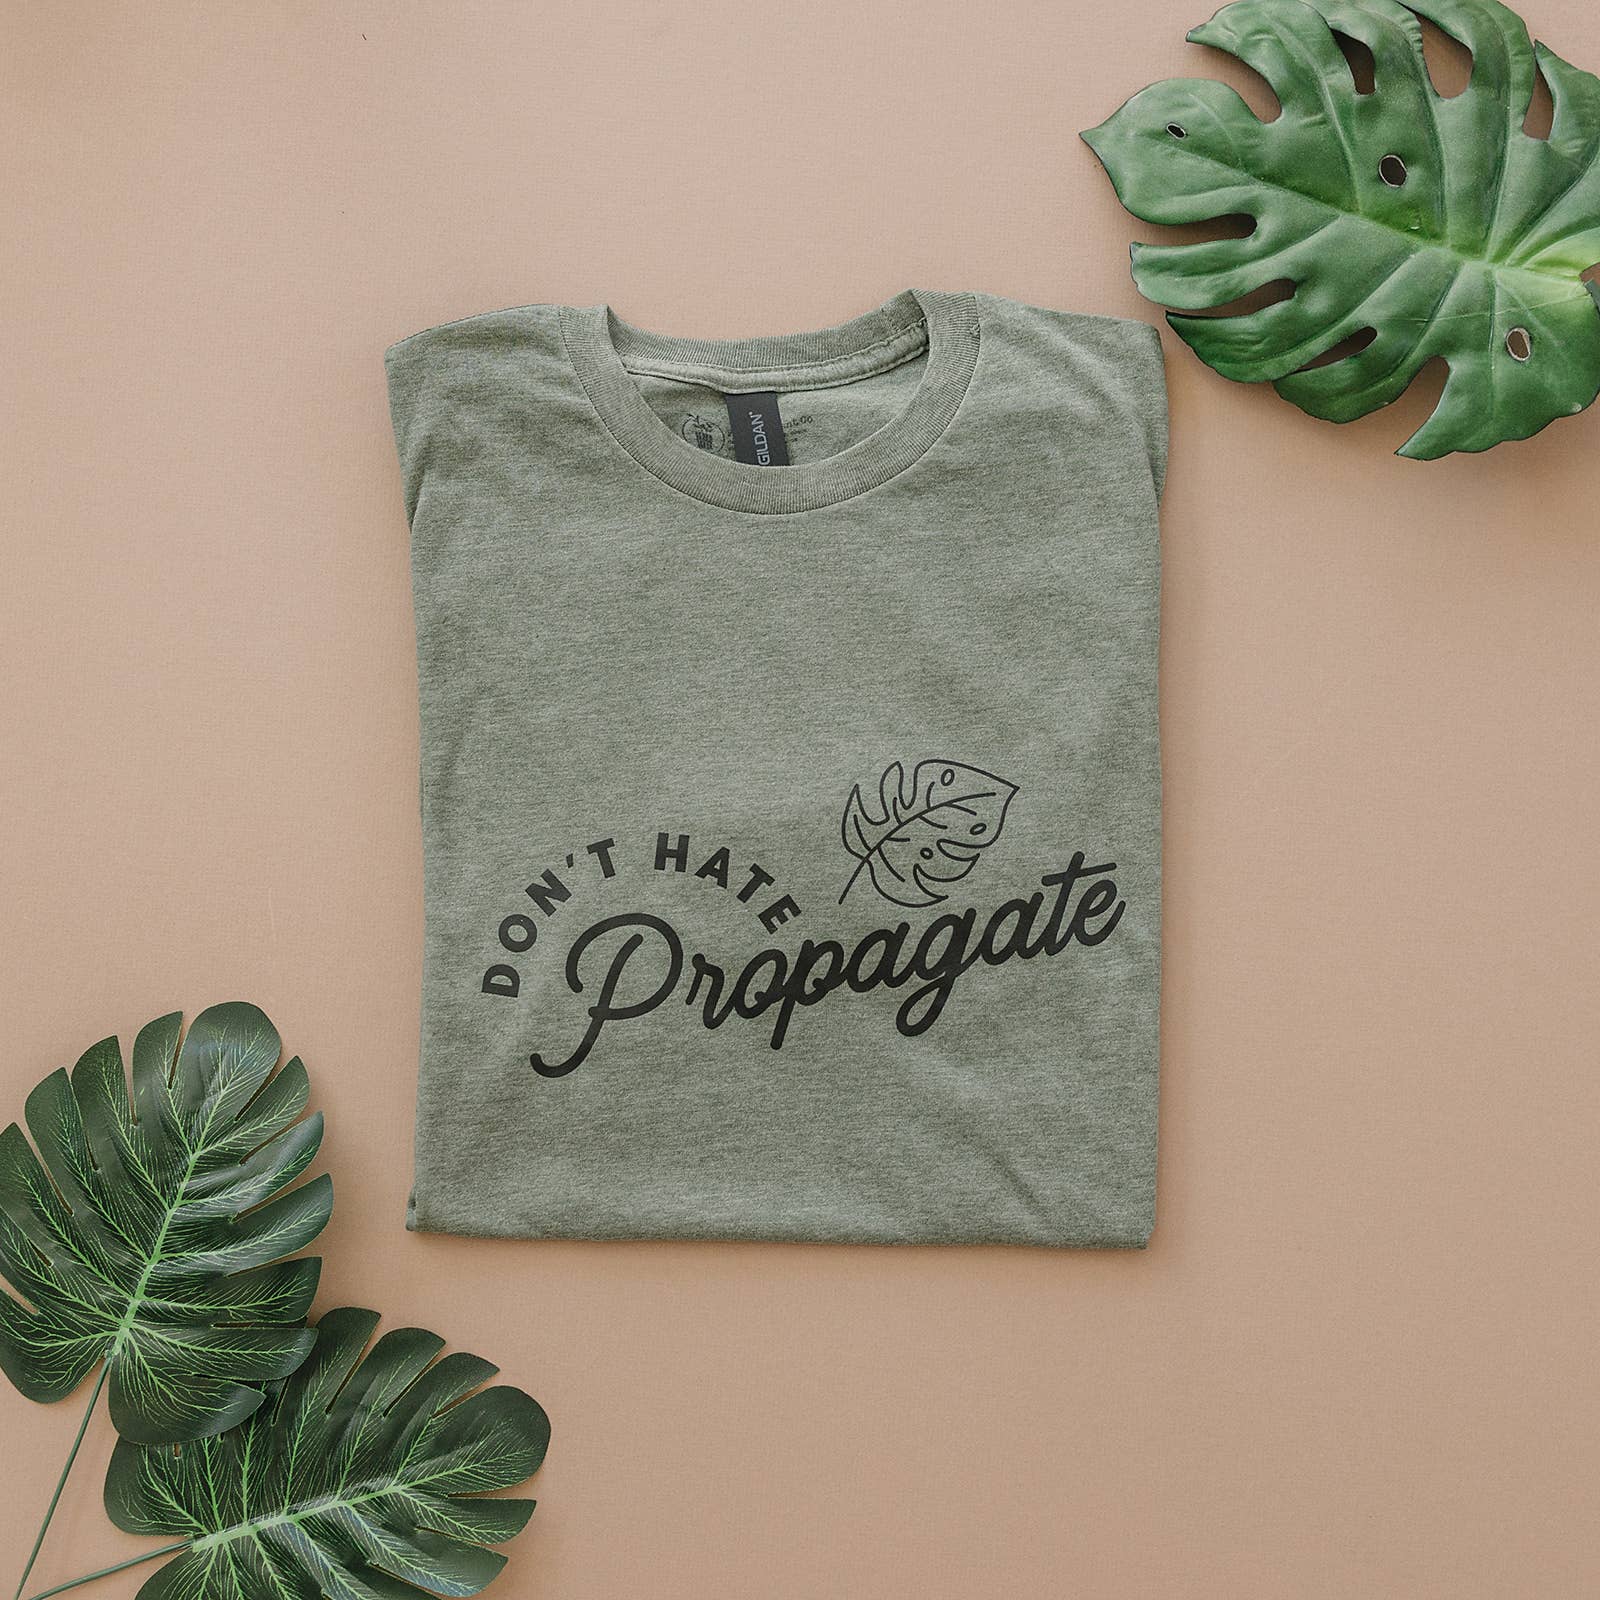 Packer Plant Co - "Don't Hate, Propagate" Plant Themed Graphic T-Shirt: 2XL / Heather Military Green